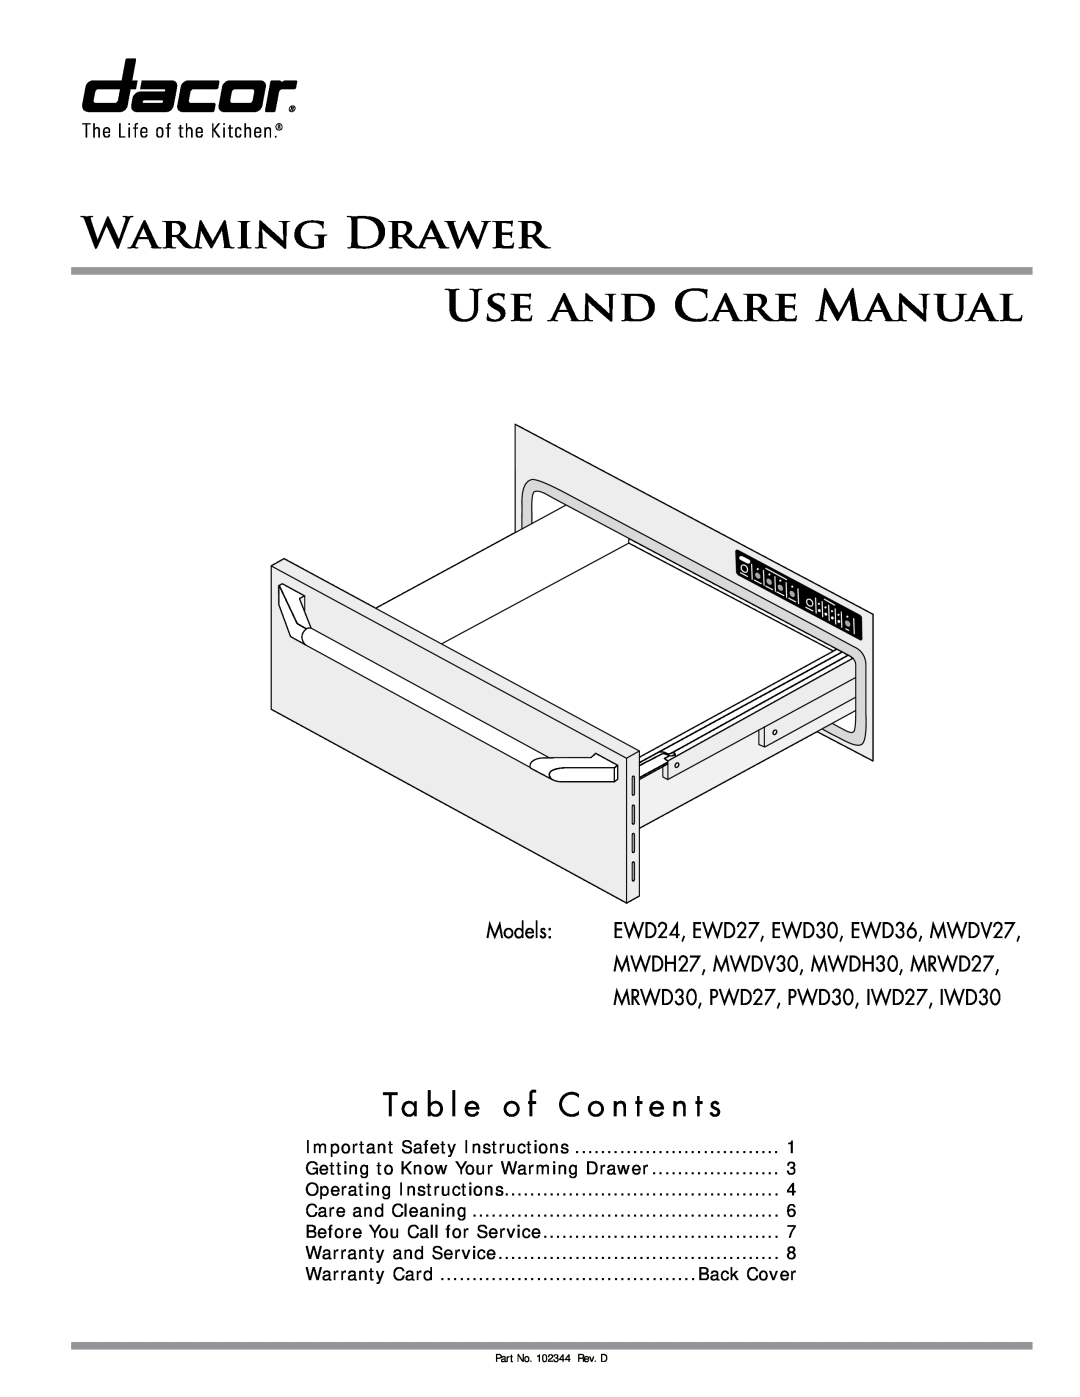 Dacor MRWD30 important safety instructions Warming Drawer Use And Care Manual, Models, MWDH27, MWDV30, MWDH30, MRWD27 